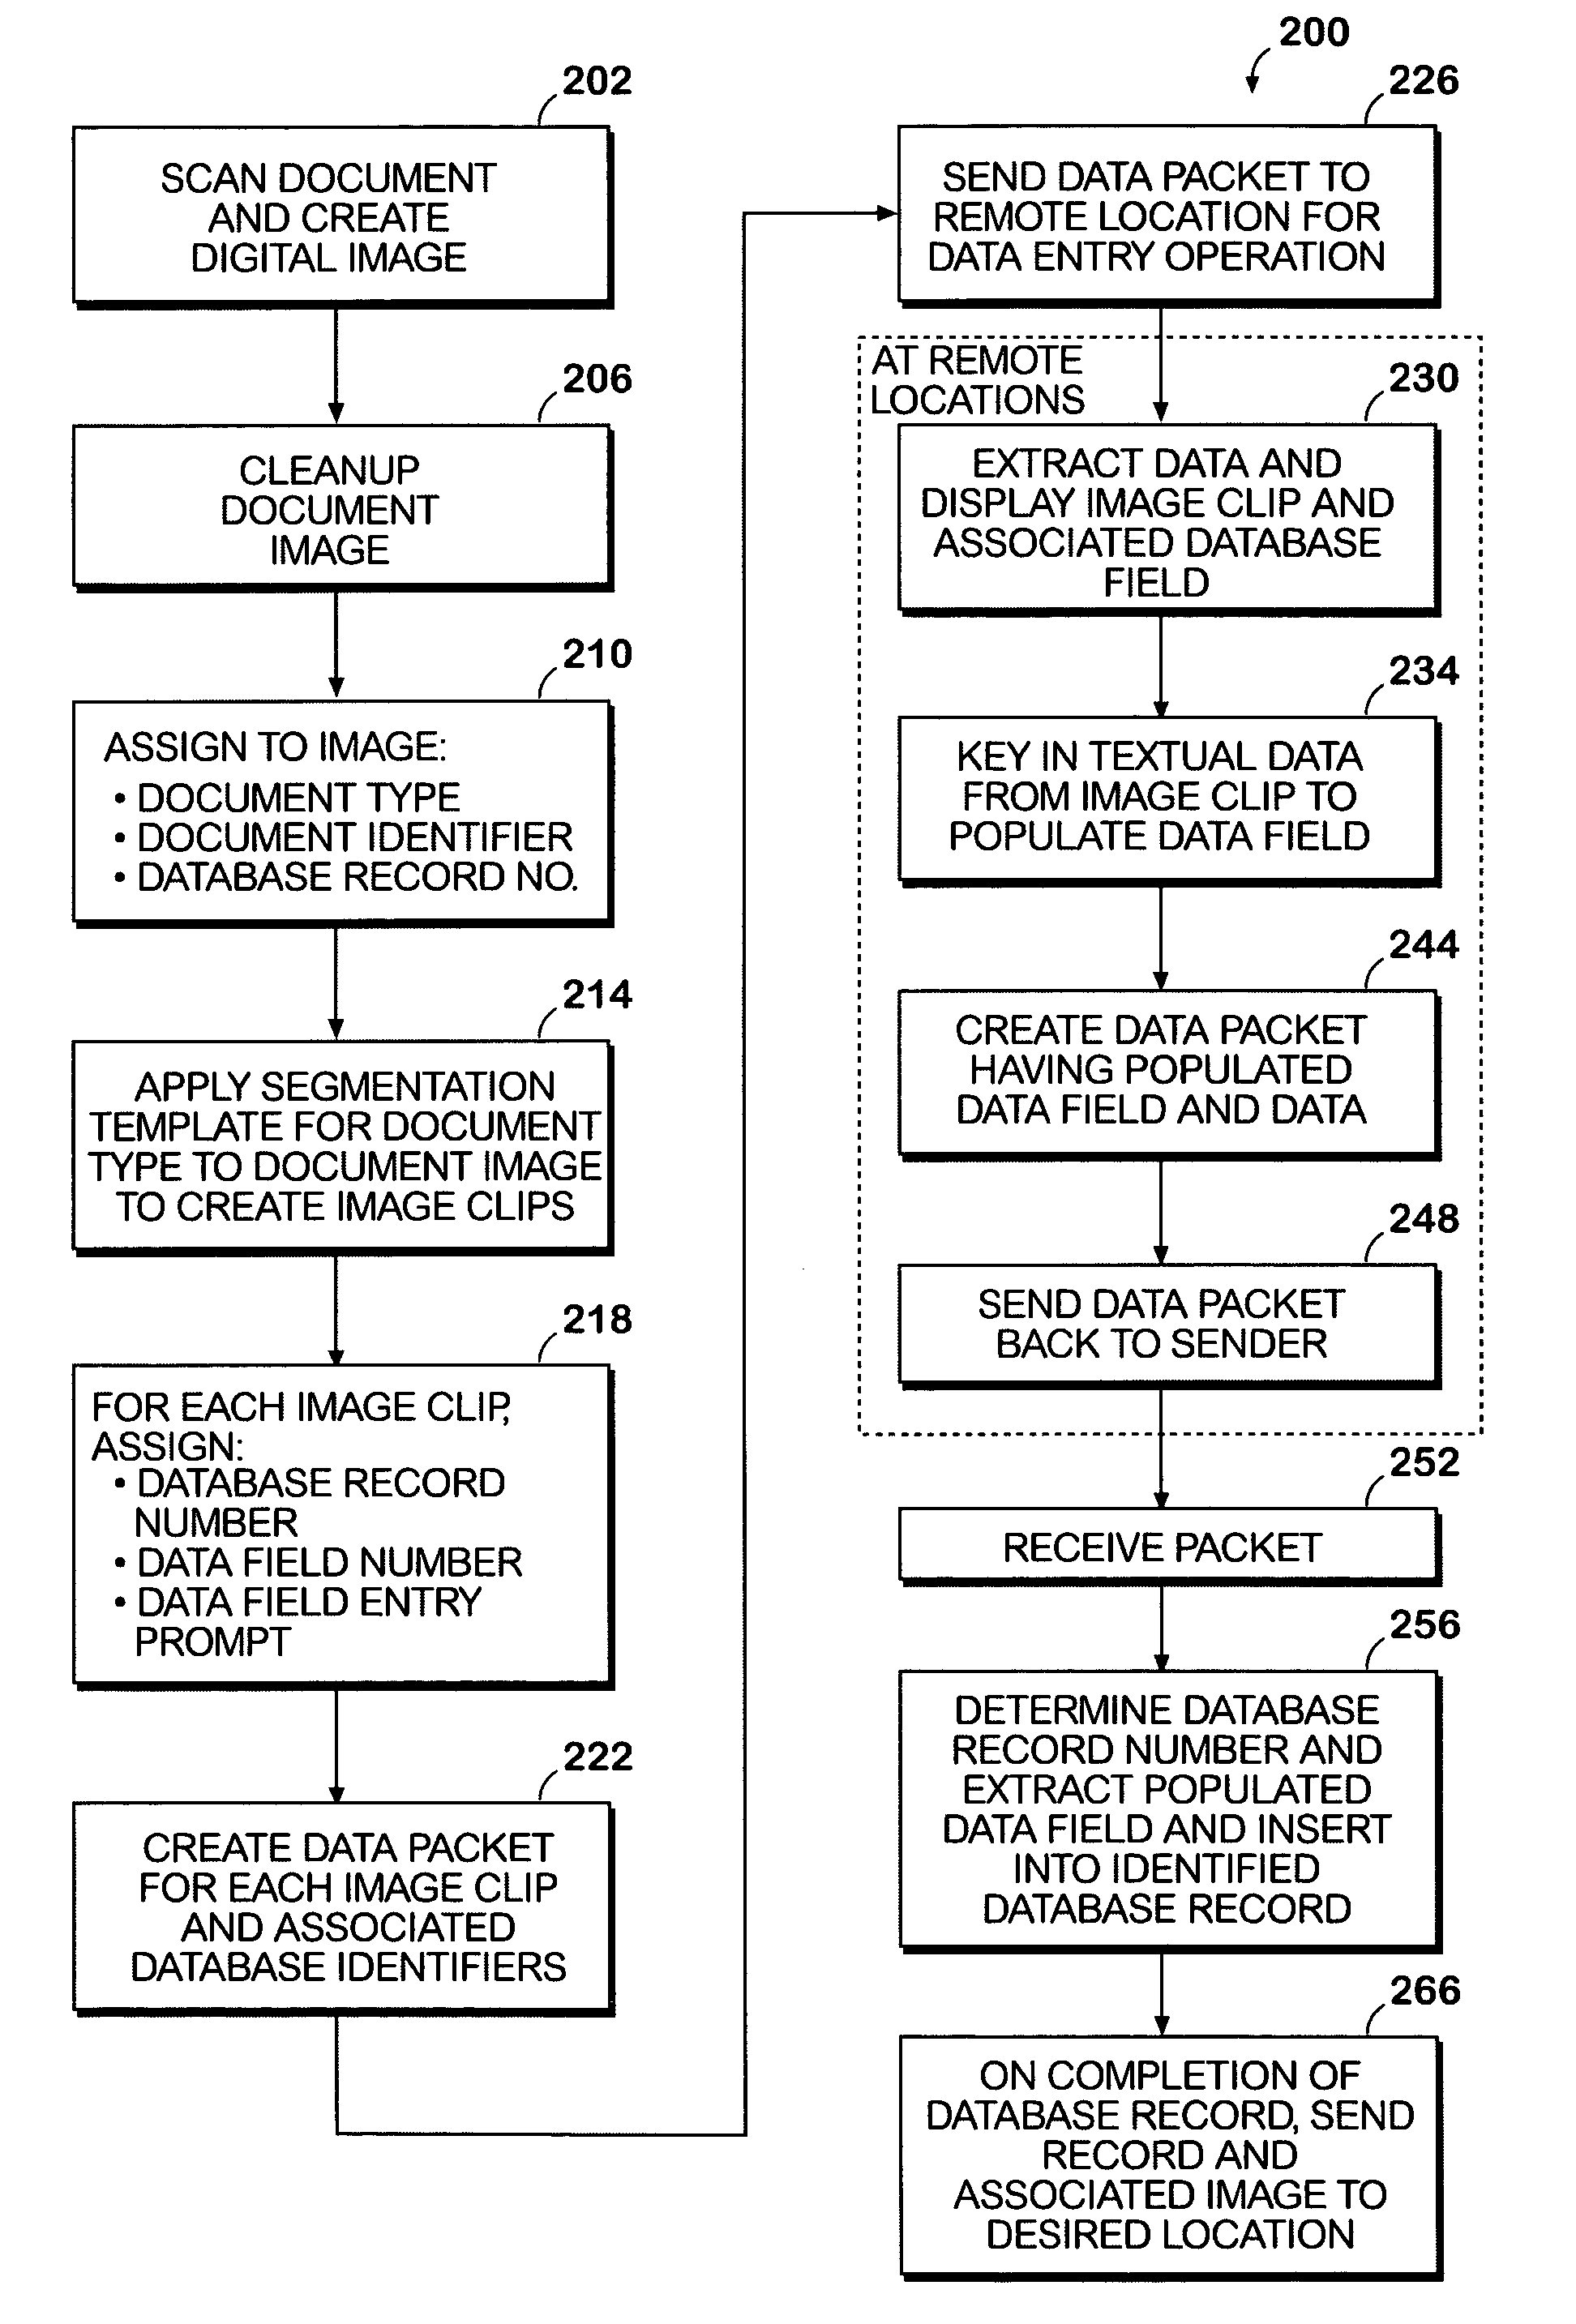 System and method for the secure data entry from document images